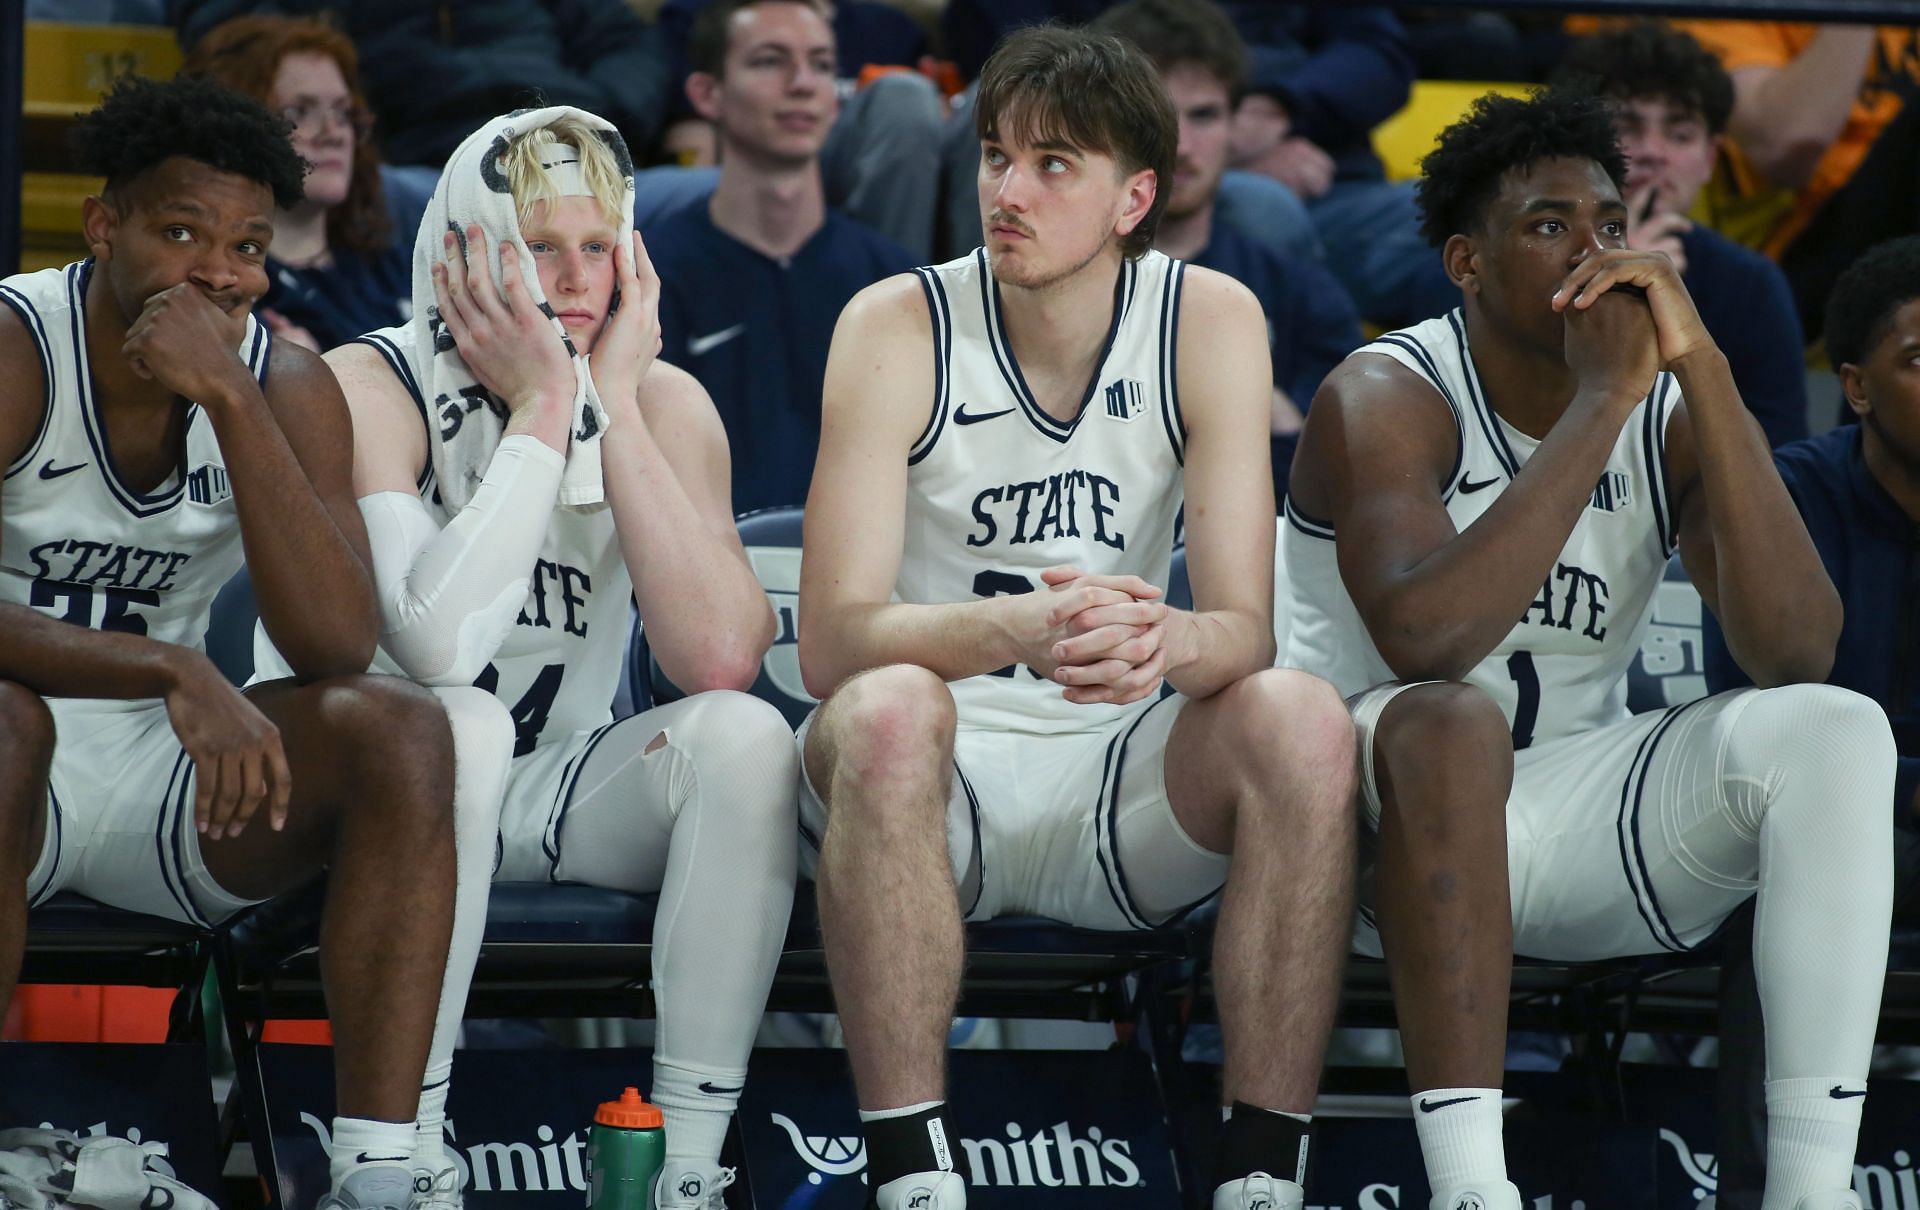 Nigel Burris #35, Karson Templin #24, Isaac Johnson #20 and Great Osobor #1 of the Utah State Aggies react on the bench during the final minutes against the Nevada Wolf Pack.